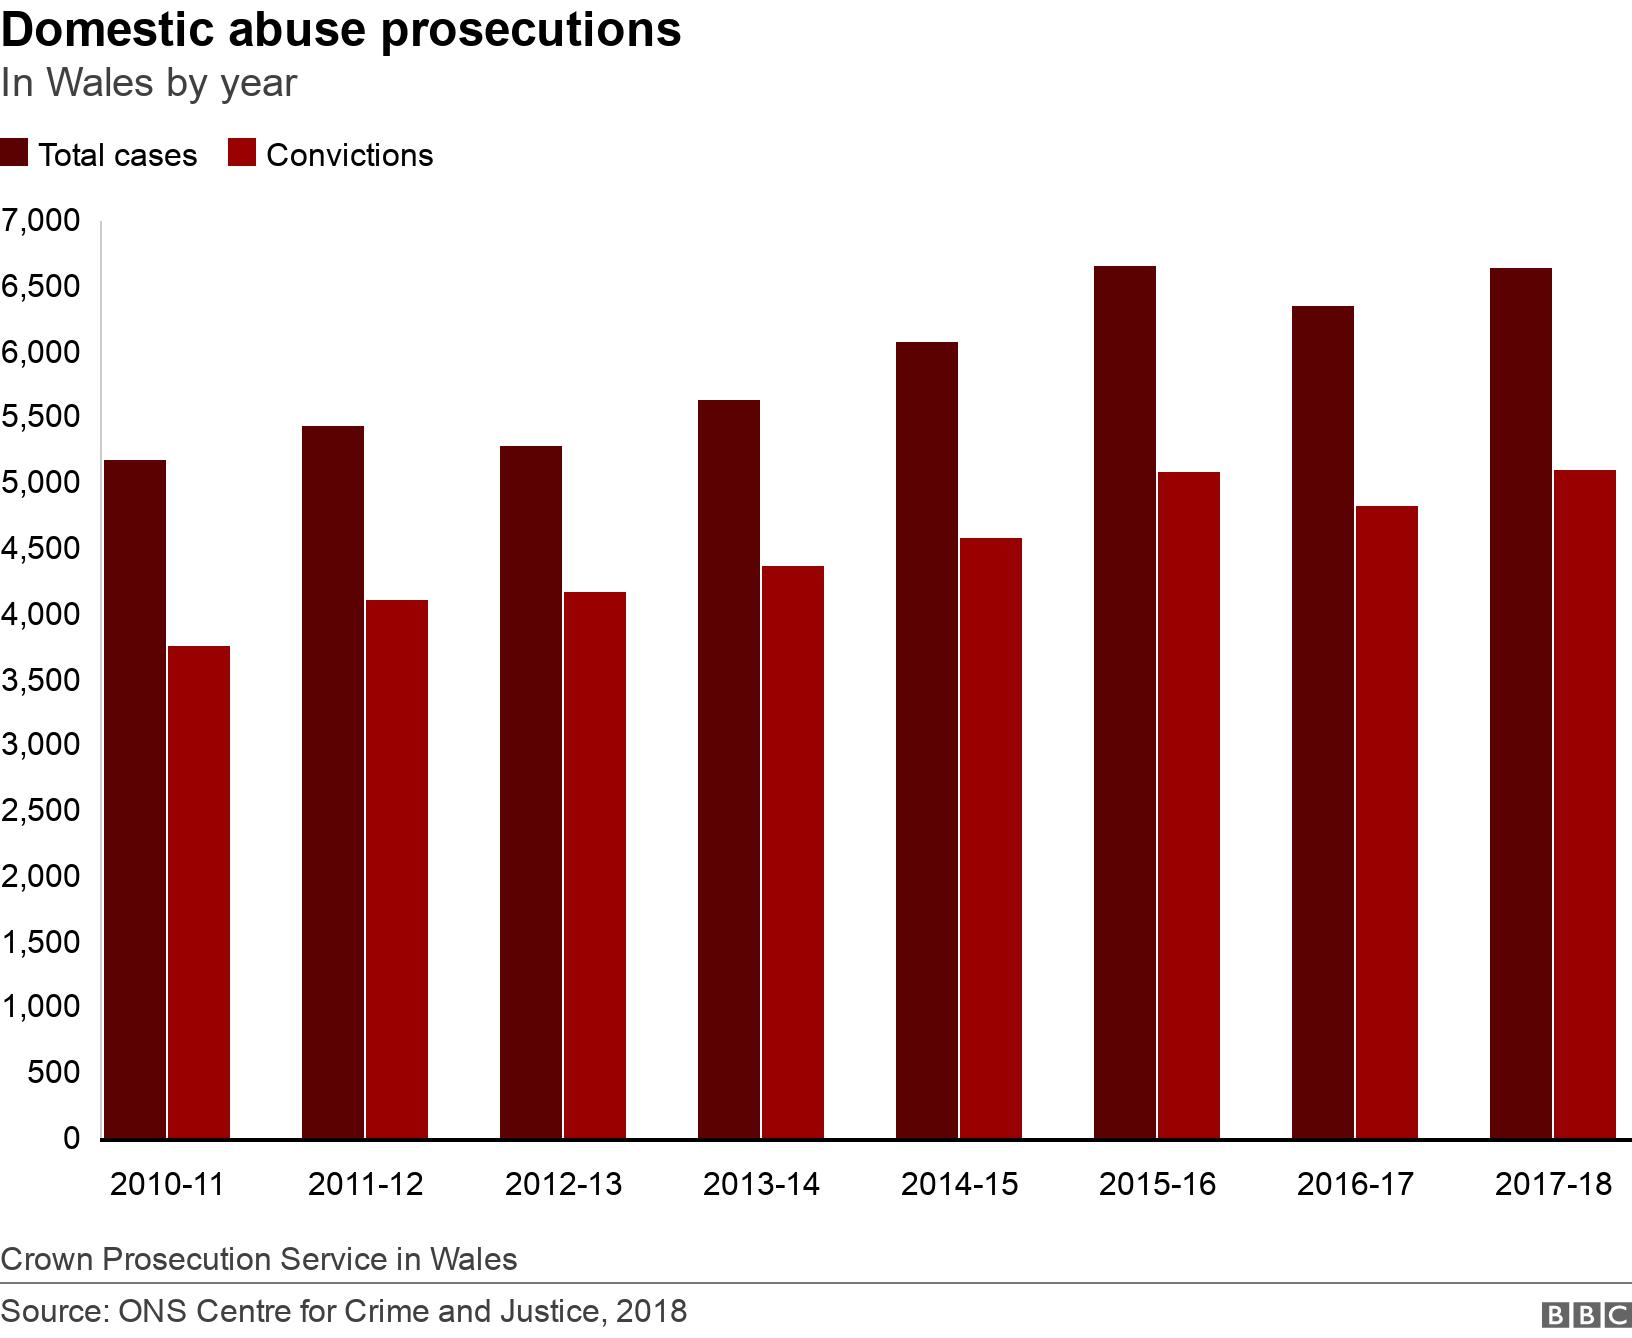  Domestic abuse prosecutions. In Wales by year. Crown Prosecution Service in Wales.